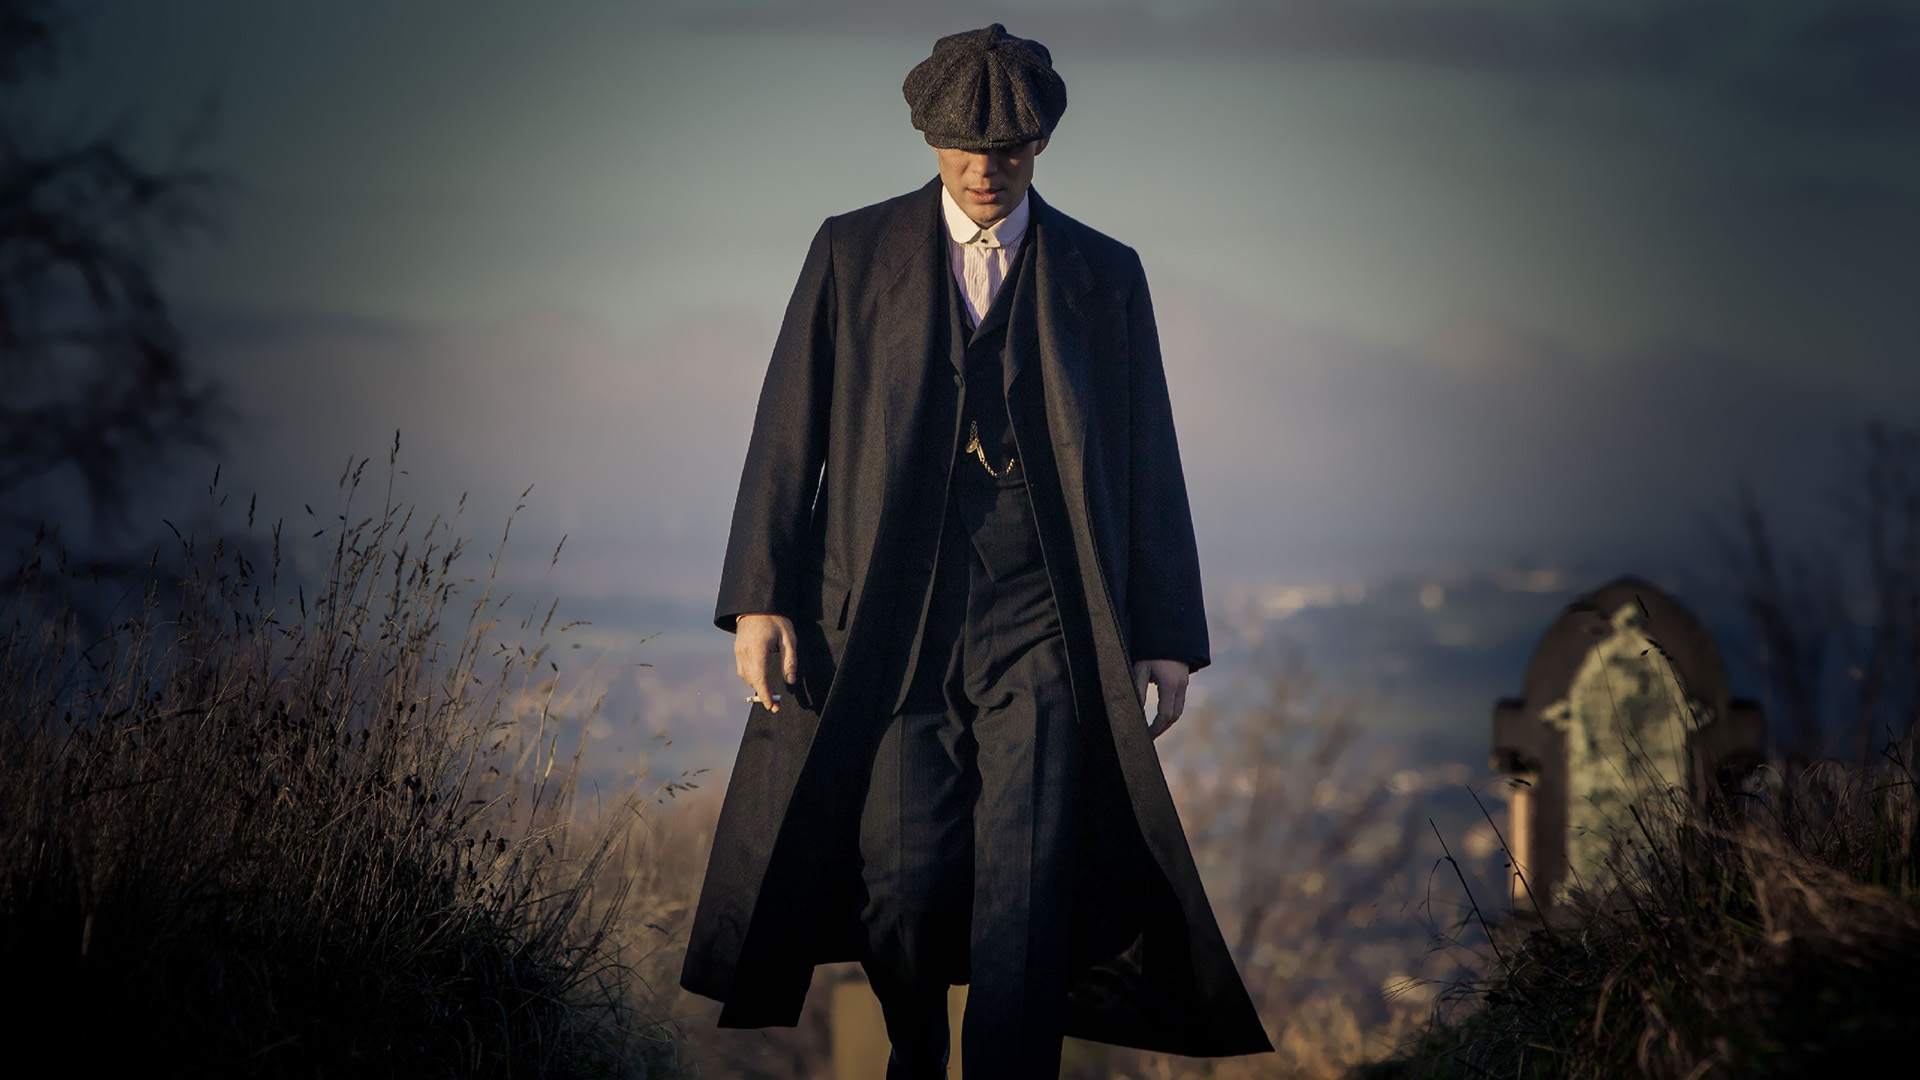 peaky blinders iphone wallpaper,outerwear,fashion,cloak,photography,overcoat